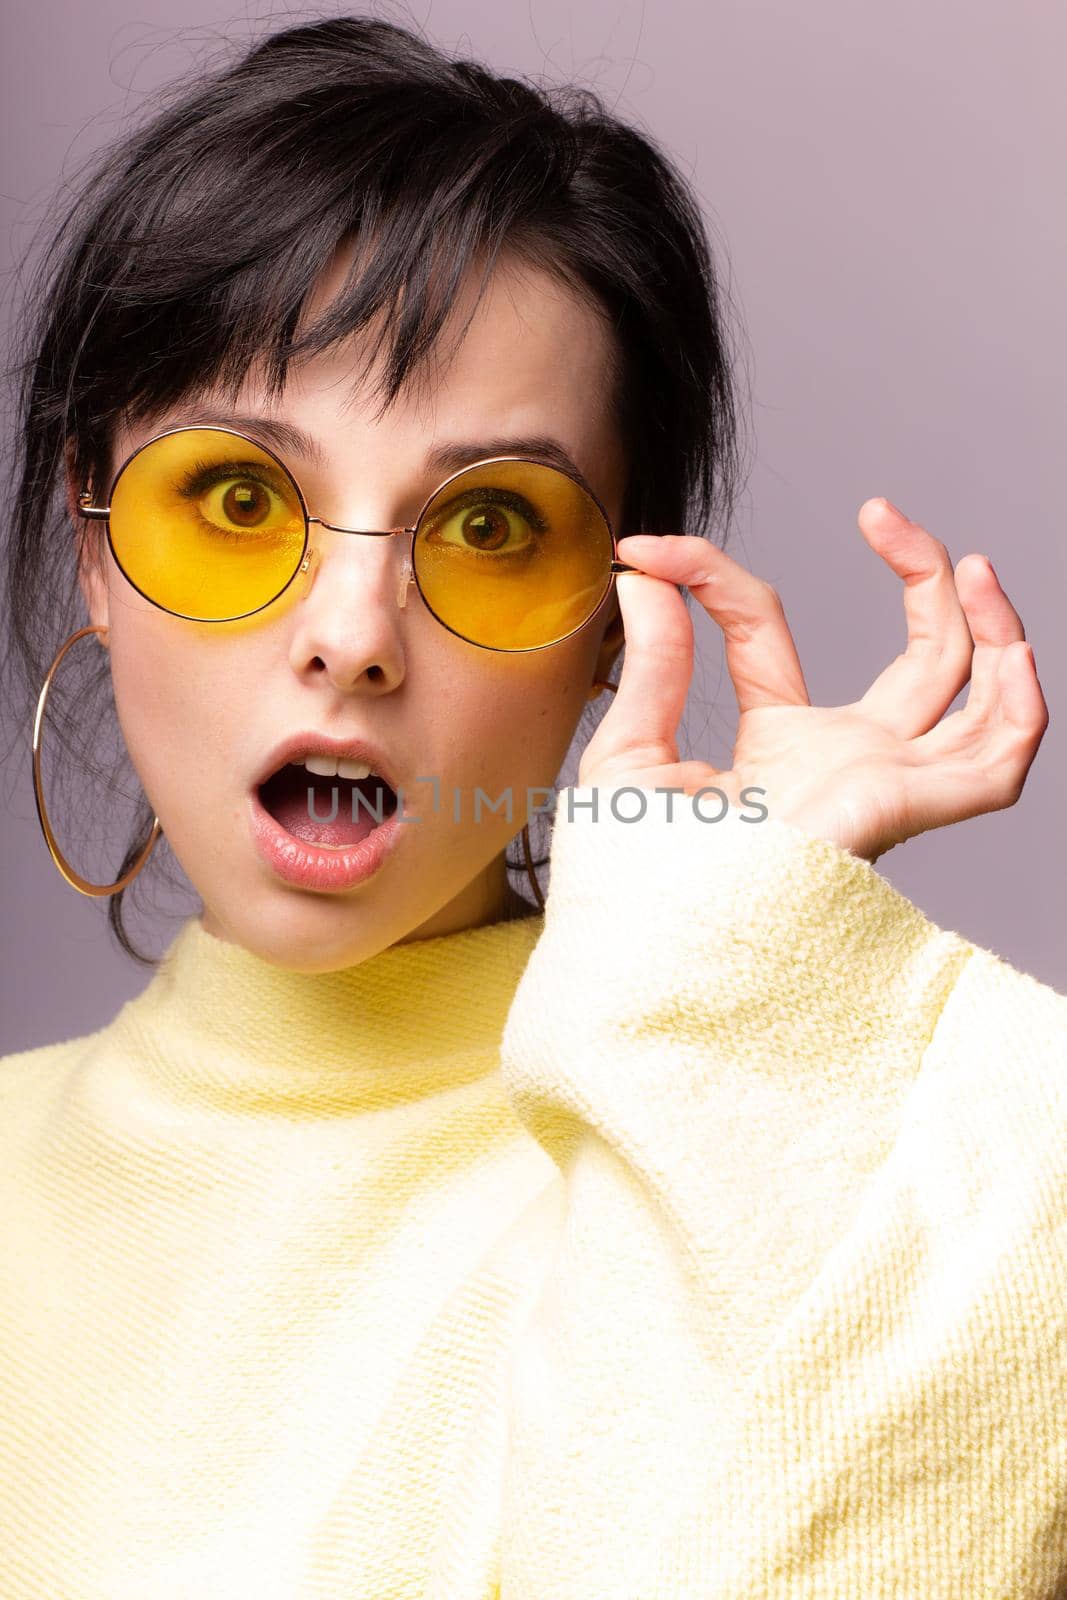 brunette woman in yellow glasses and yellow sweater, close-up portrait. High quality photo